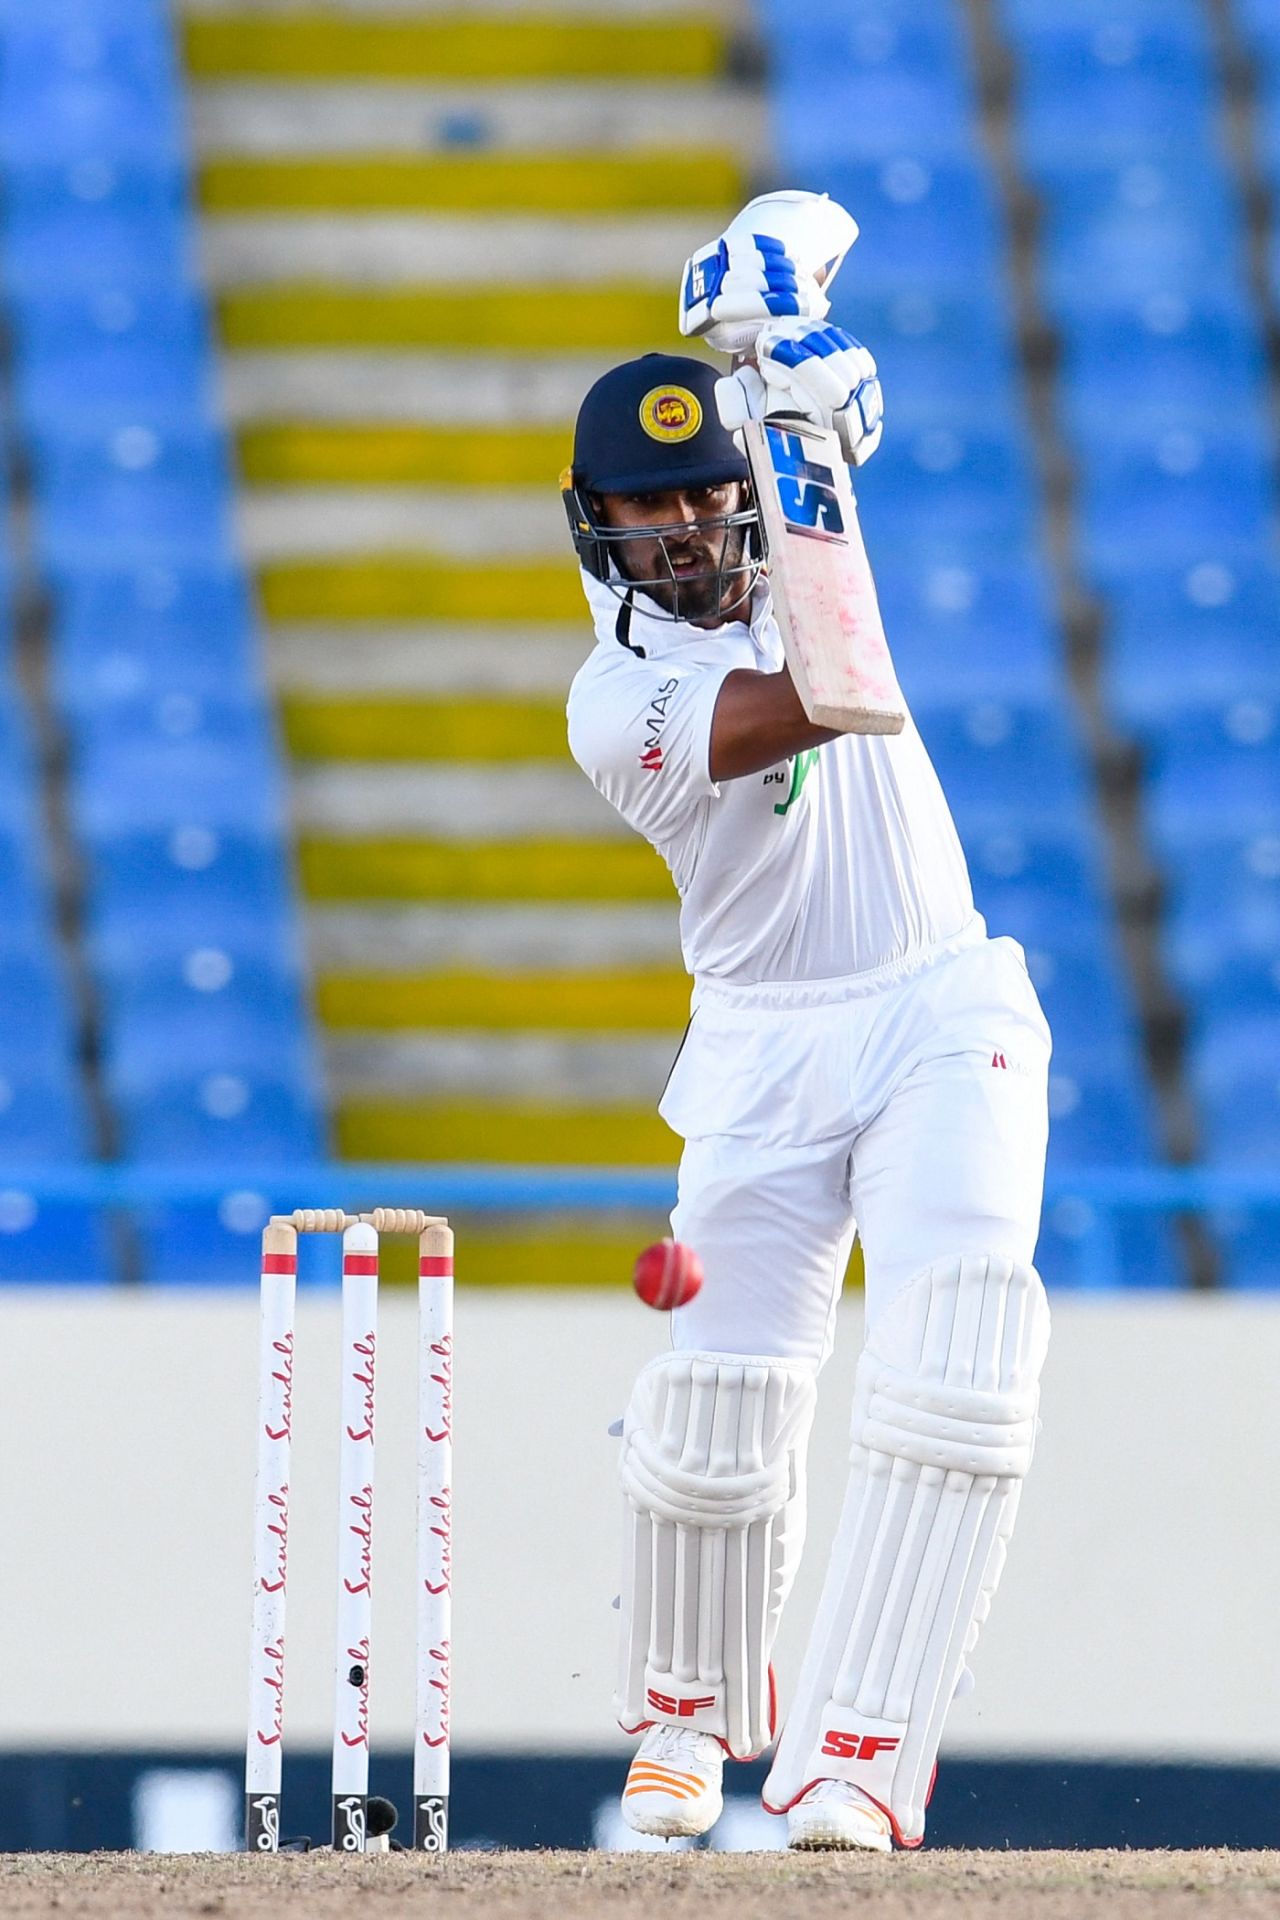 Dinesh Candimal plays handsomely down the ground, West Indies vs Sri Lanka, 2nd Test, North Sound, 2nd day, March 30, 2021